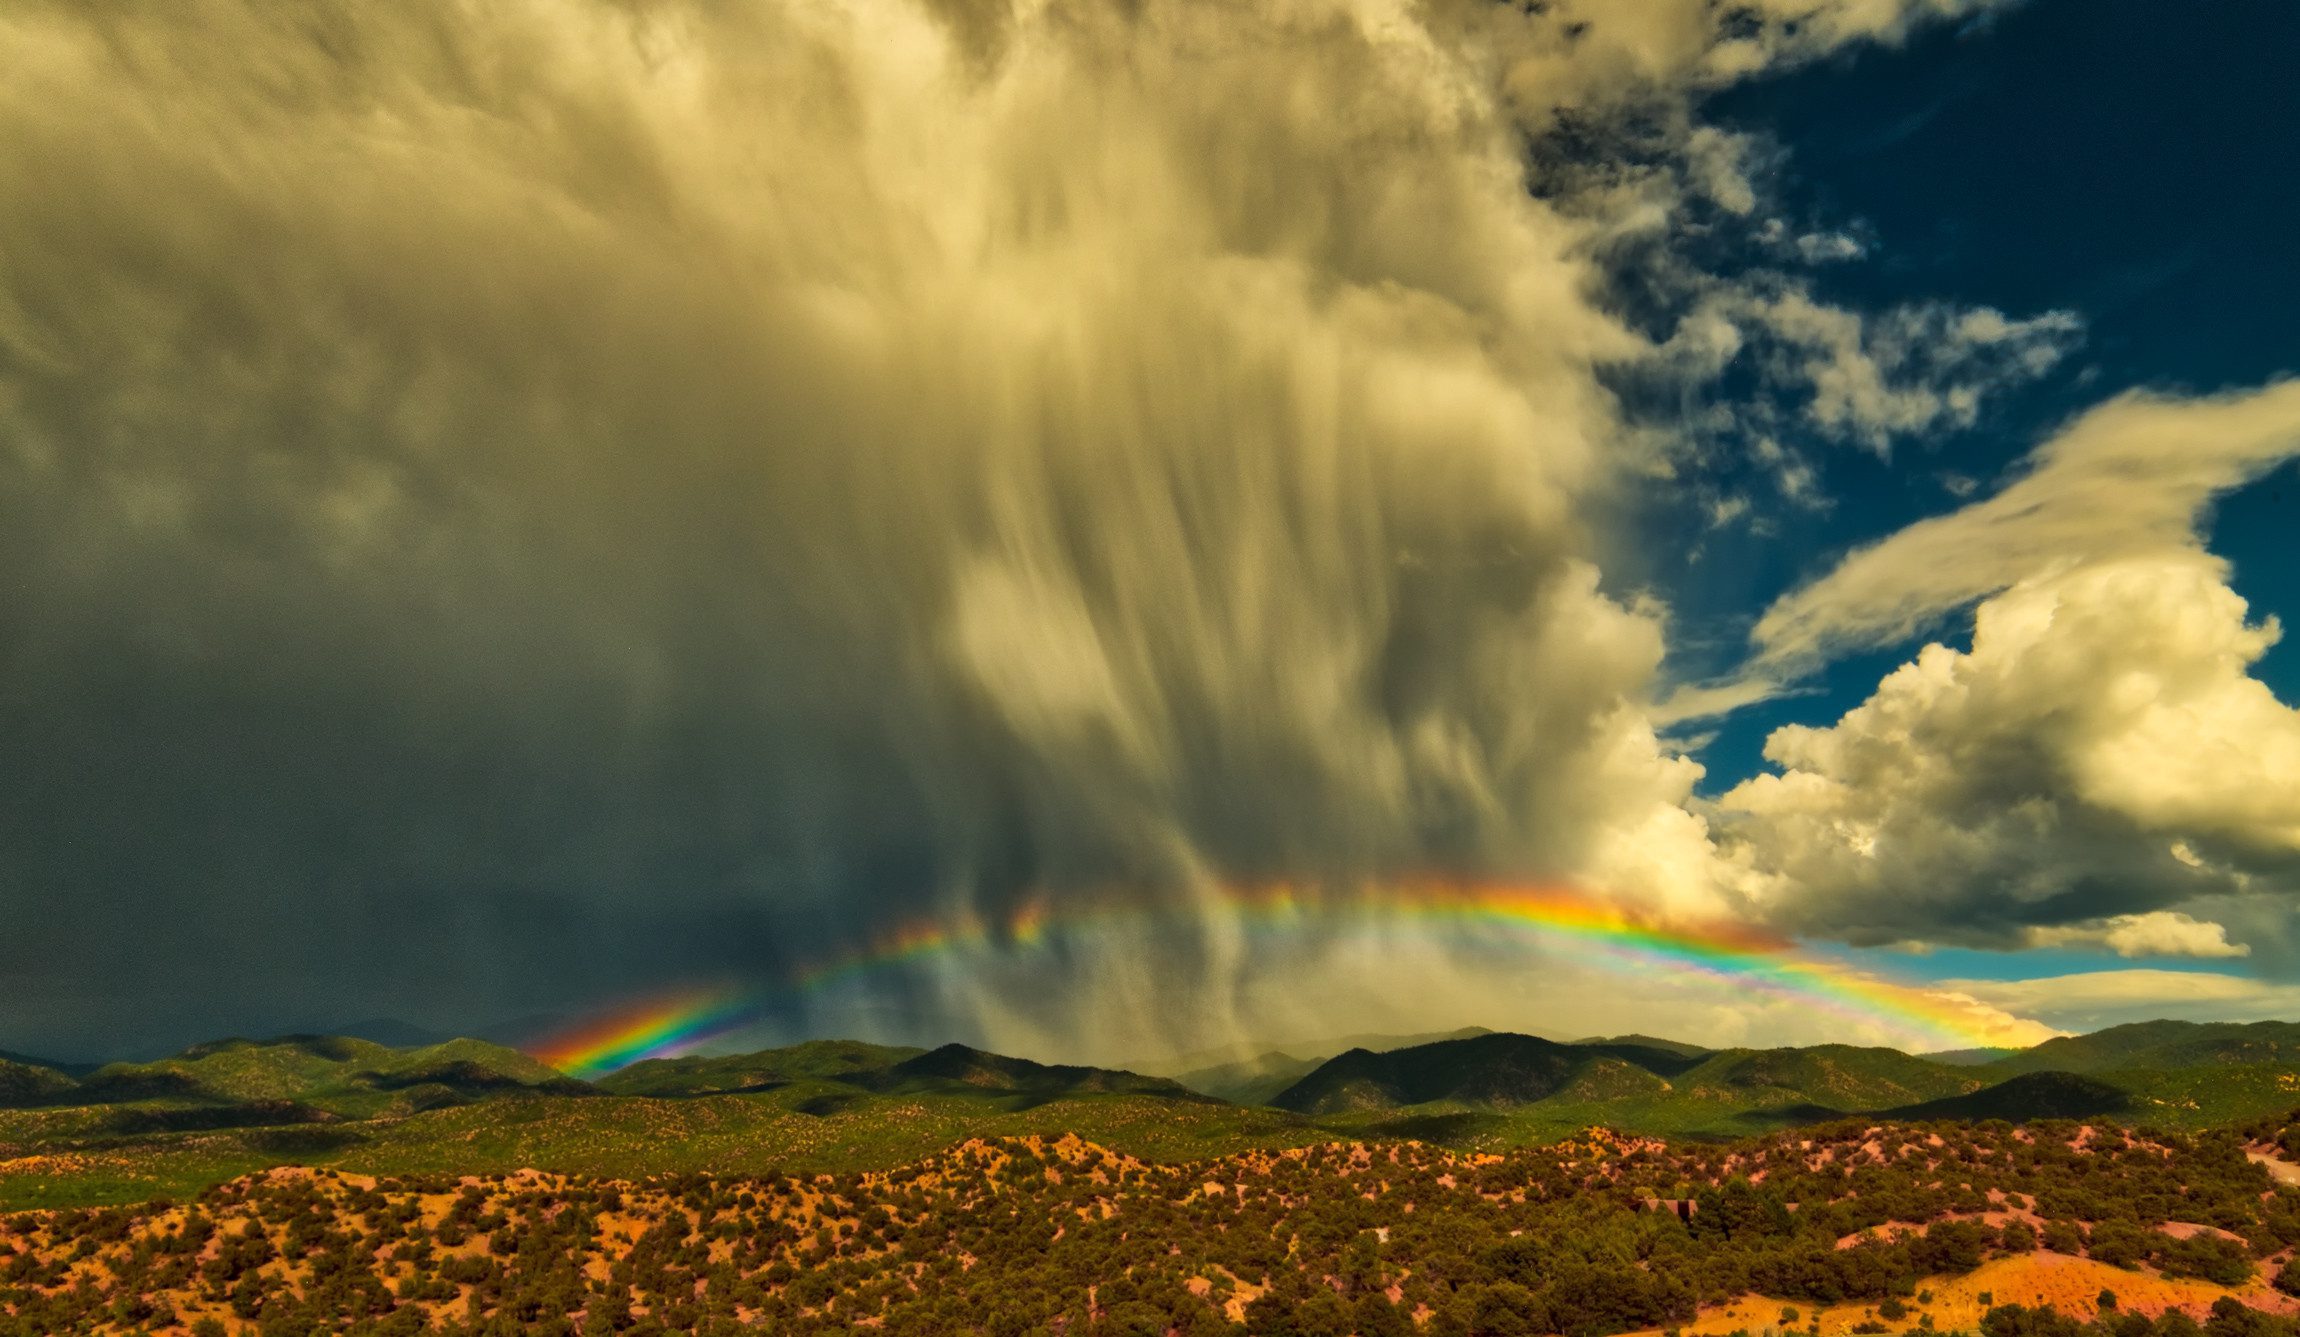 A low rainbow over Tesuque, New Mexico with curtains of falling rain.